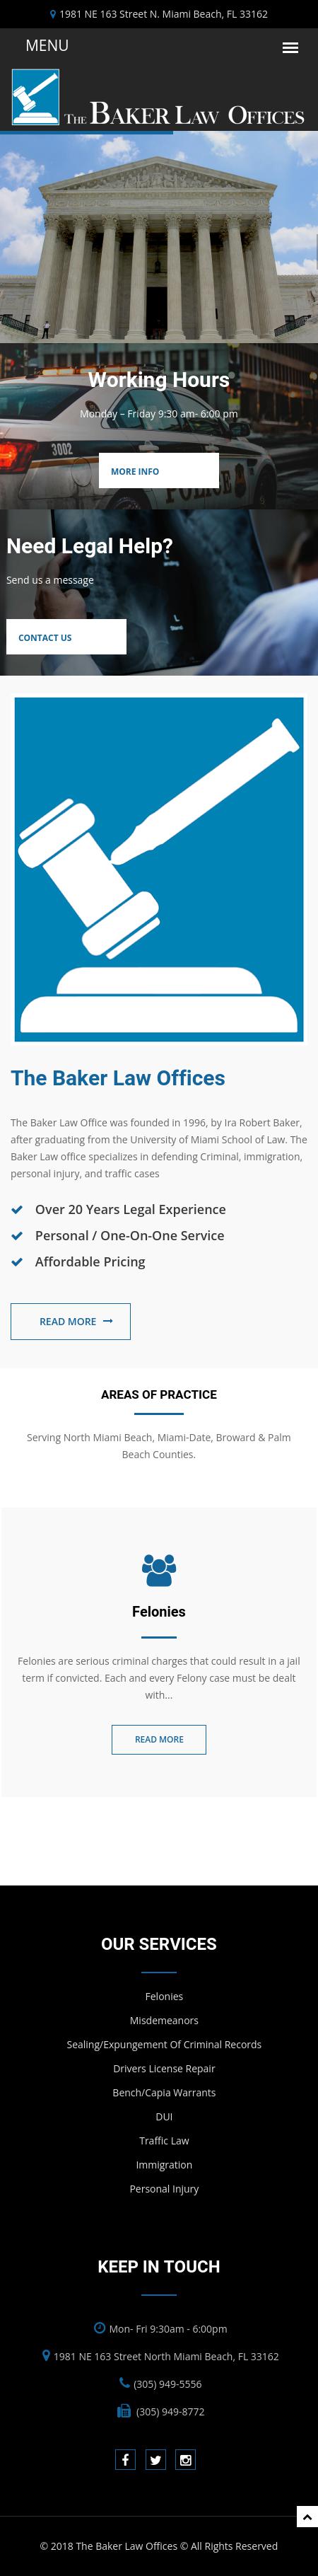 The Baker Law Offices - North Miami Beach FL Lawyers